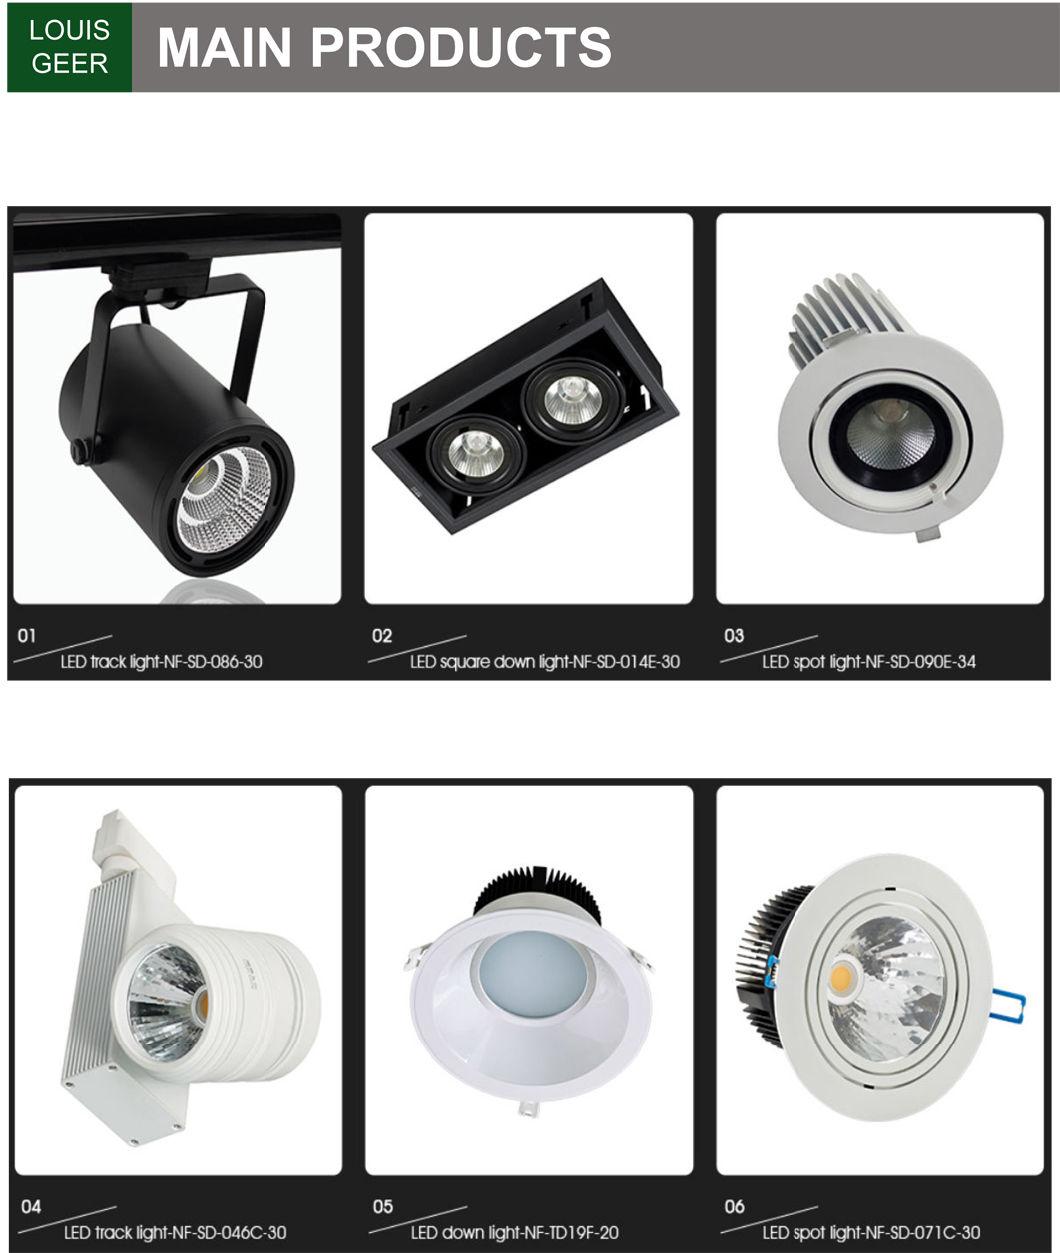 High Brightness Die-Casting Aluminum LED Lamp Recessed LED Ceiling Downlight 5W for Office Club Hotel Hospital